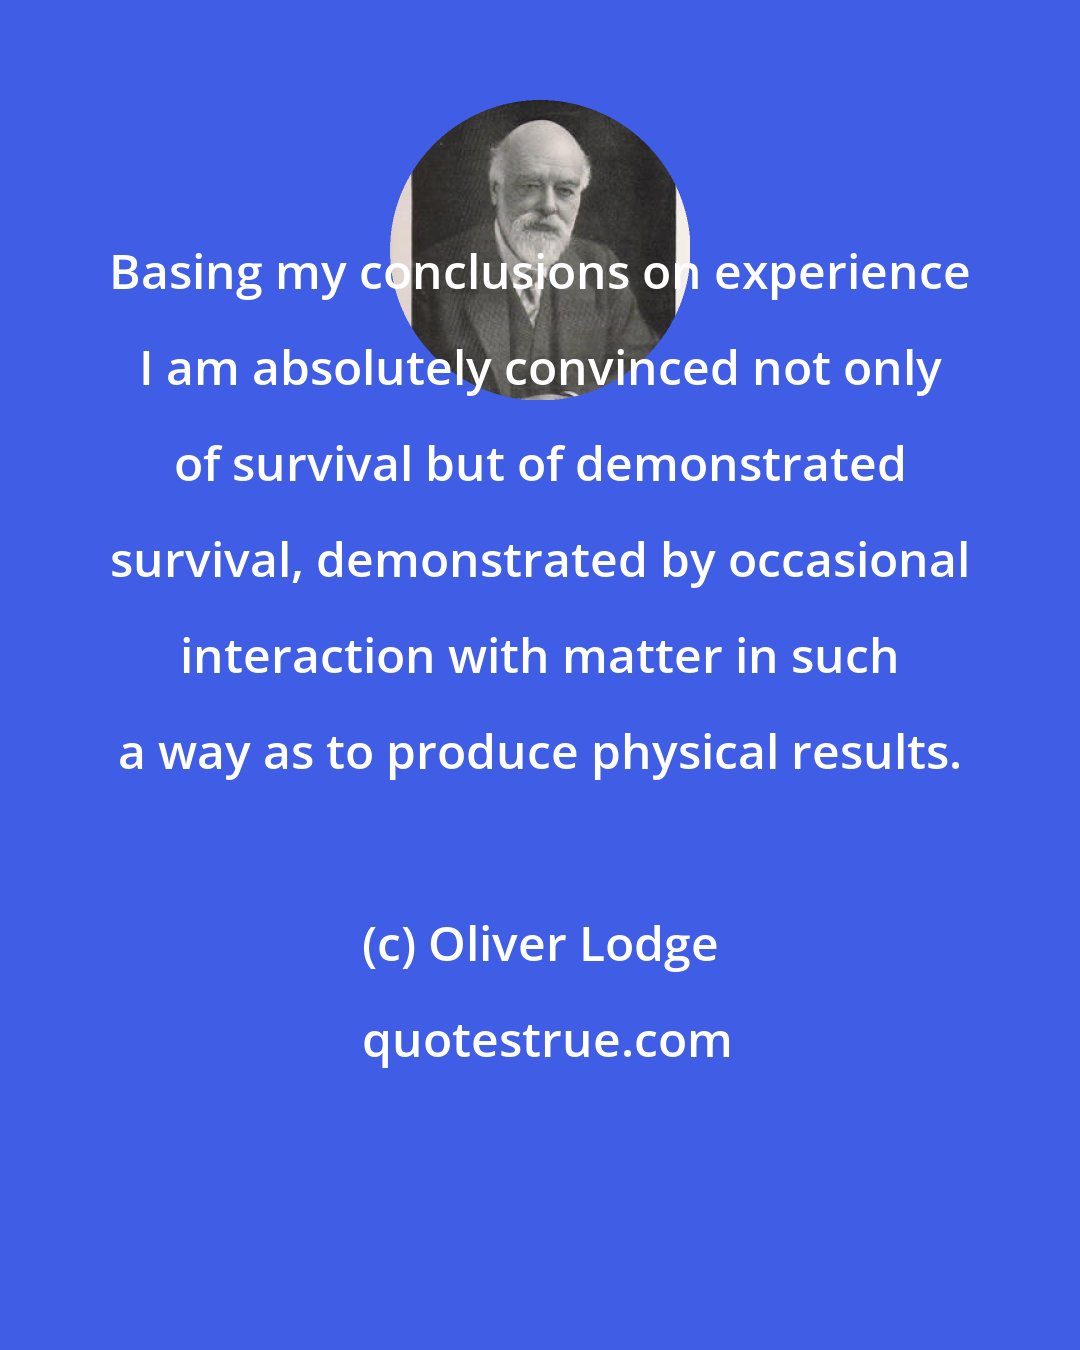 Oliver Lodge: Basing my conclusions on experience I am absolutely convinced not only of survival but of demonstrated survival, demonstrated by occasional interaction with matter in such a way as to produce physical results.